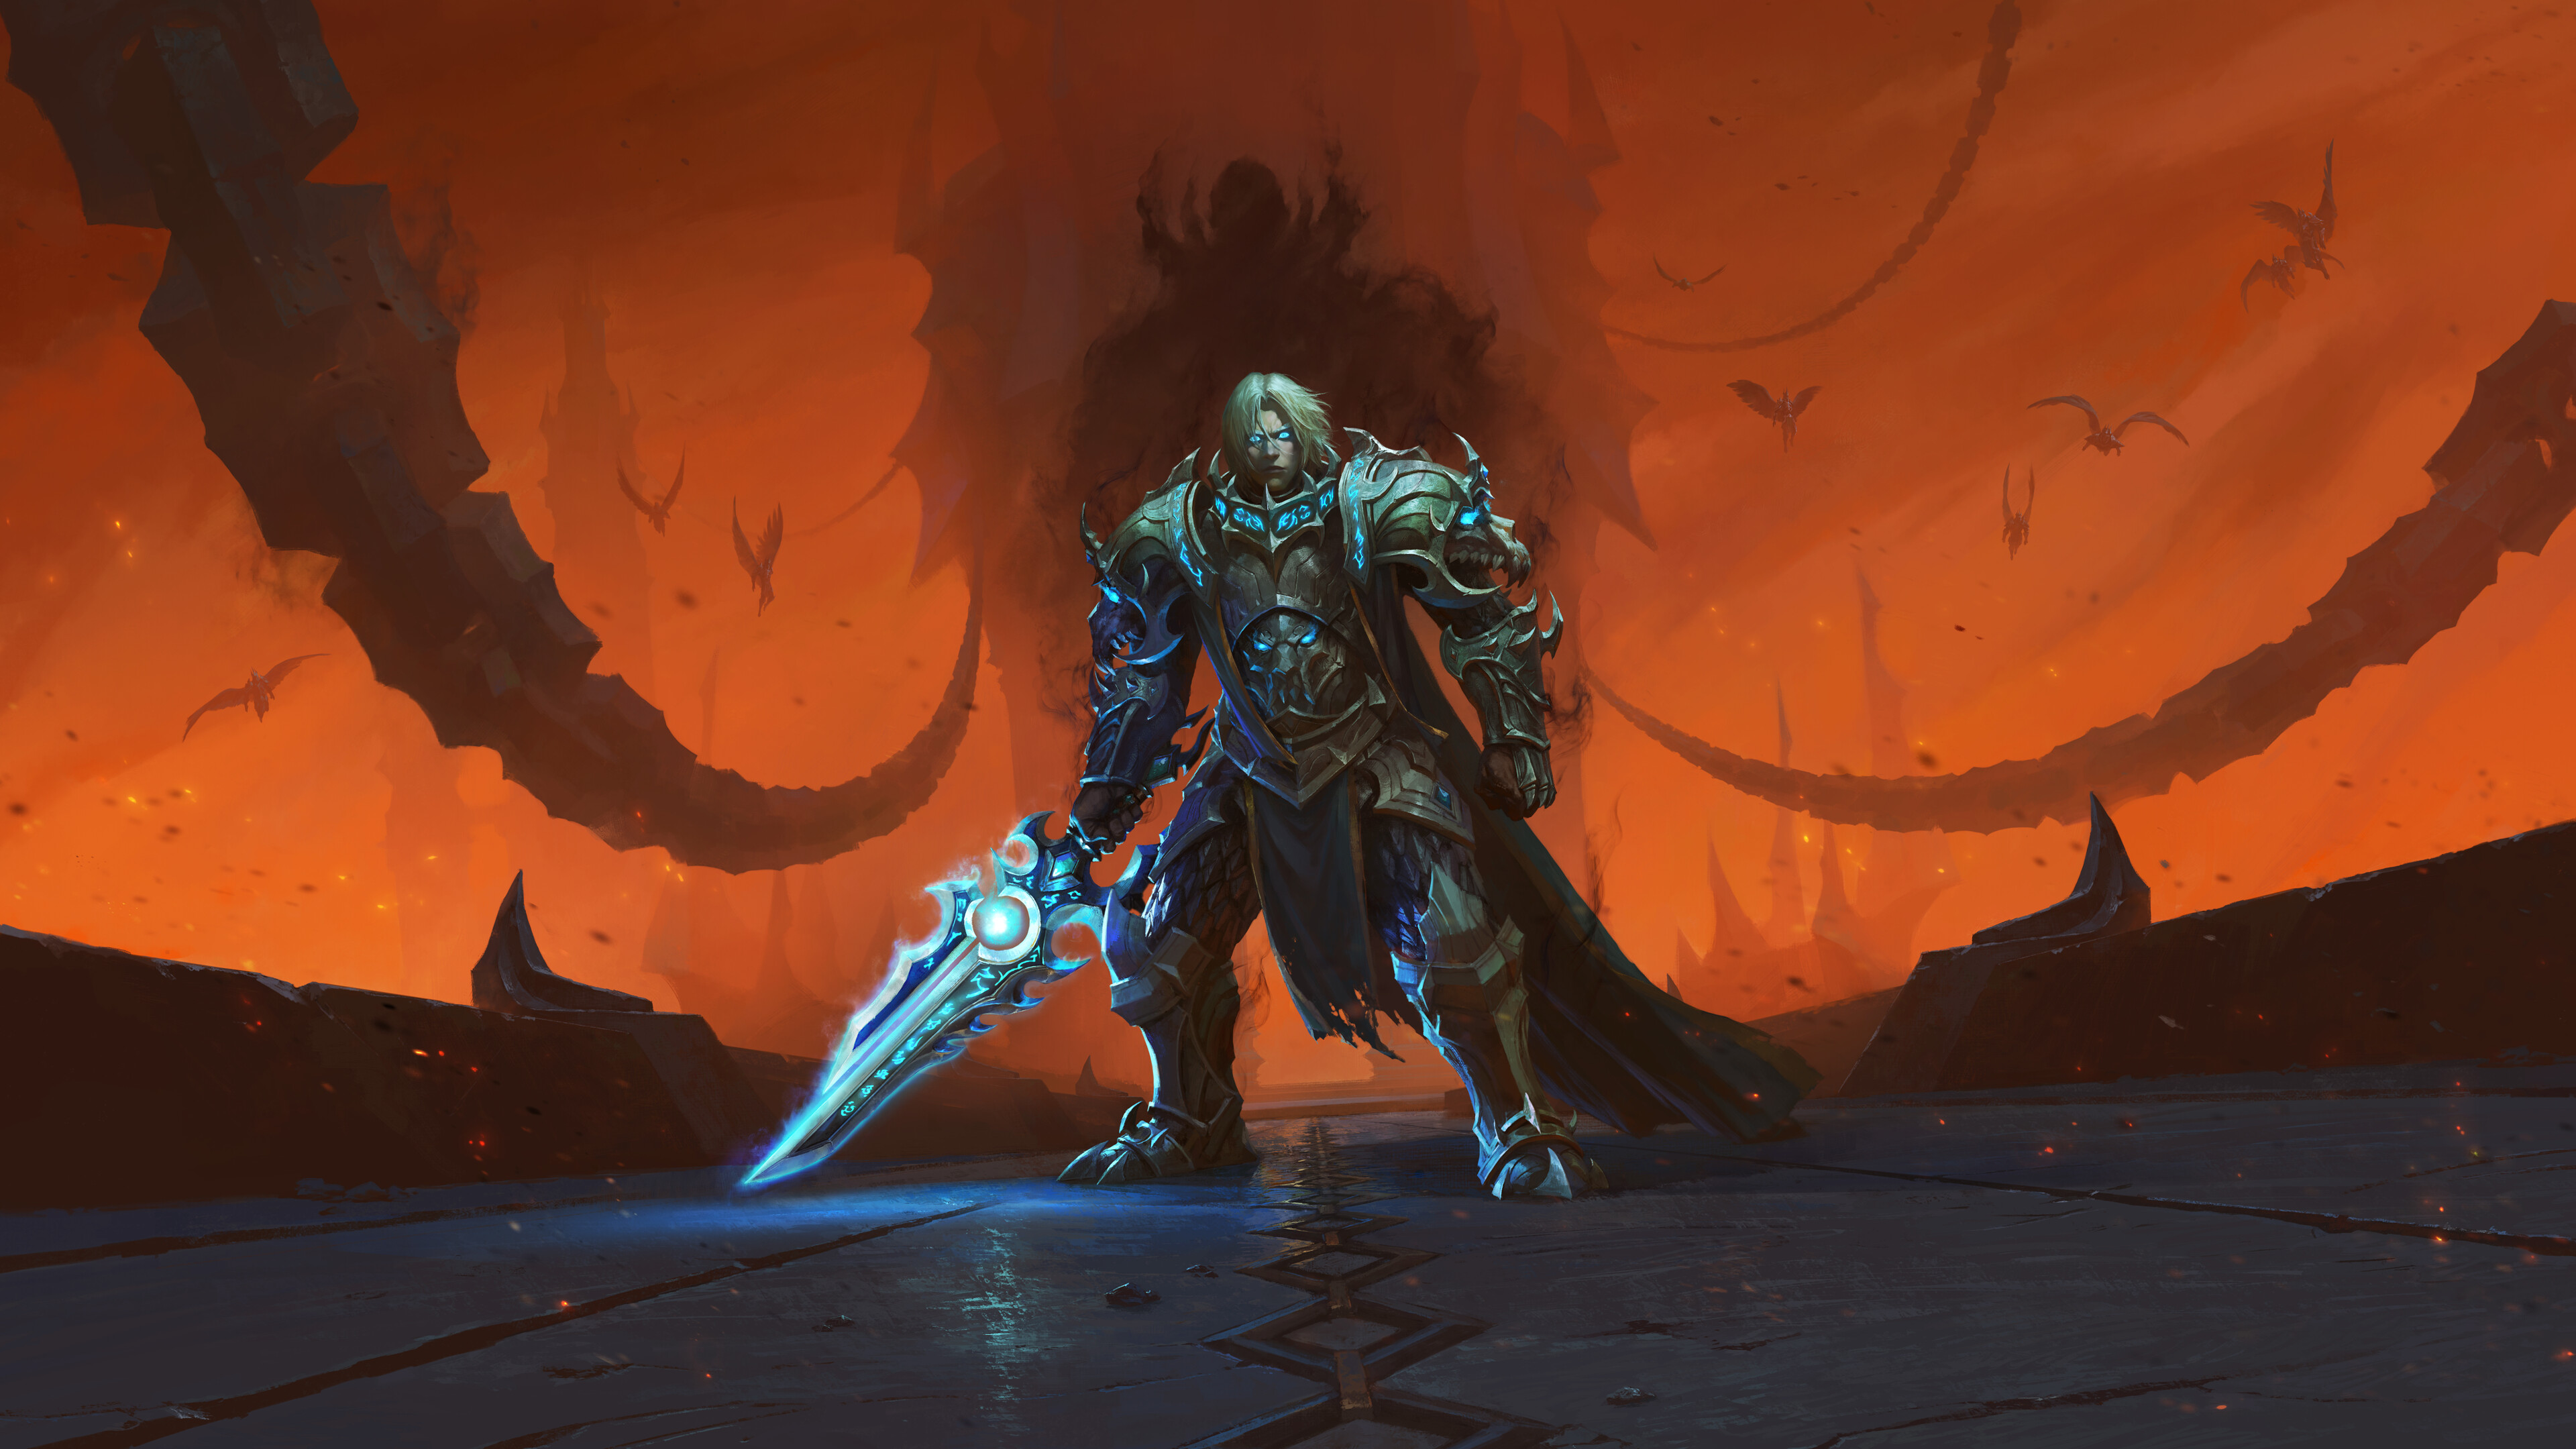 World of Warcraft: Chains of Domination, Anduin Wrynn, MMORPG. 3840x2160 4K Wallpaper.